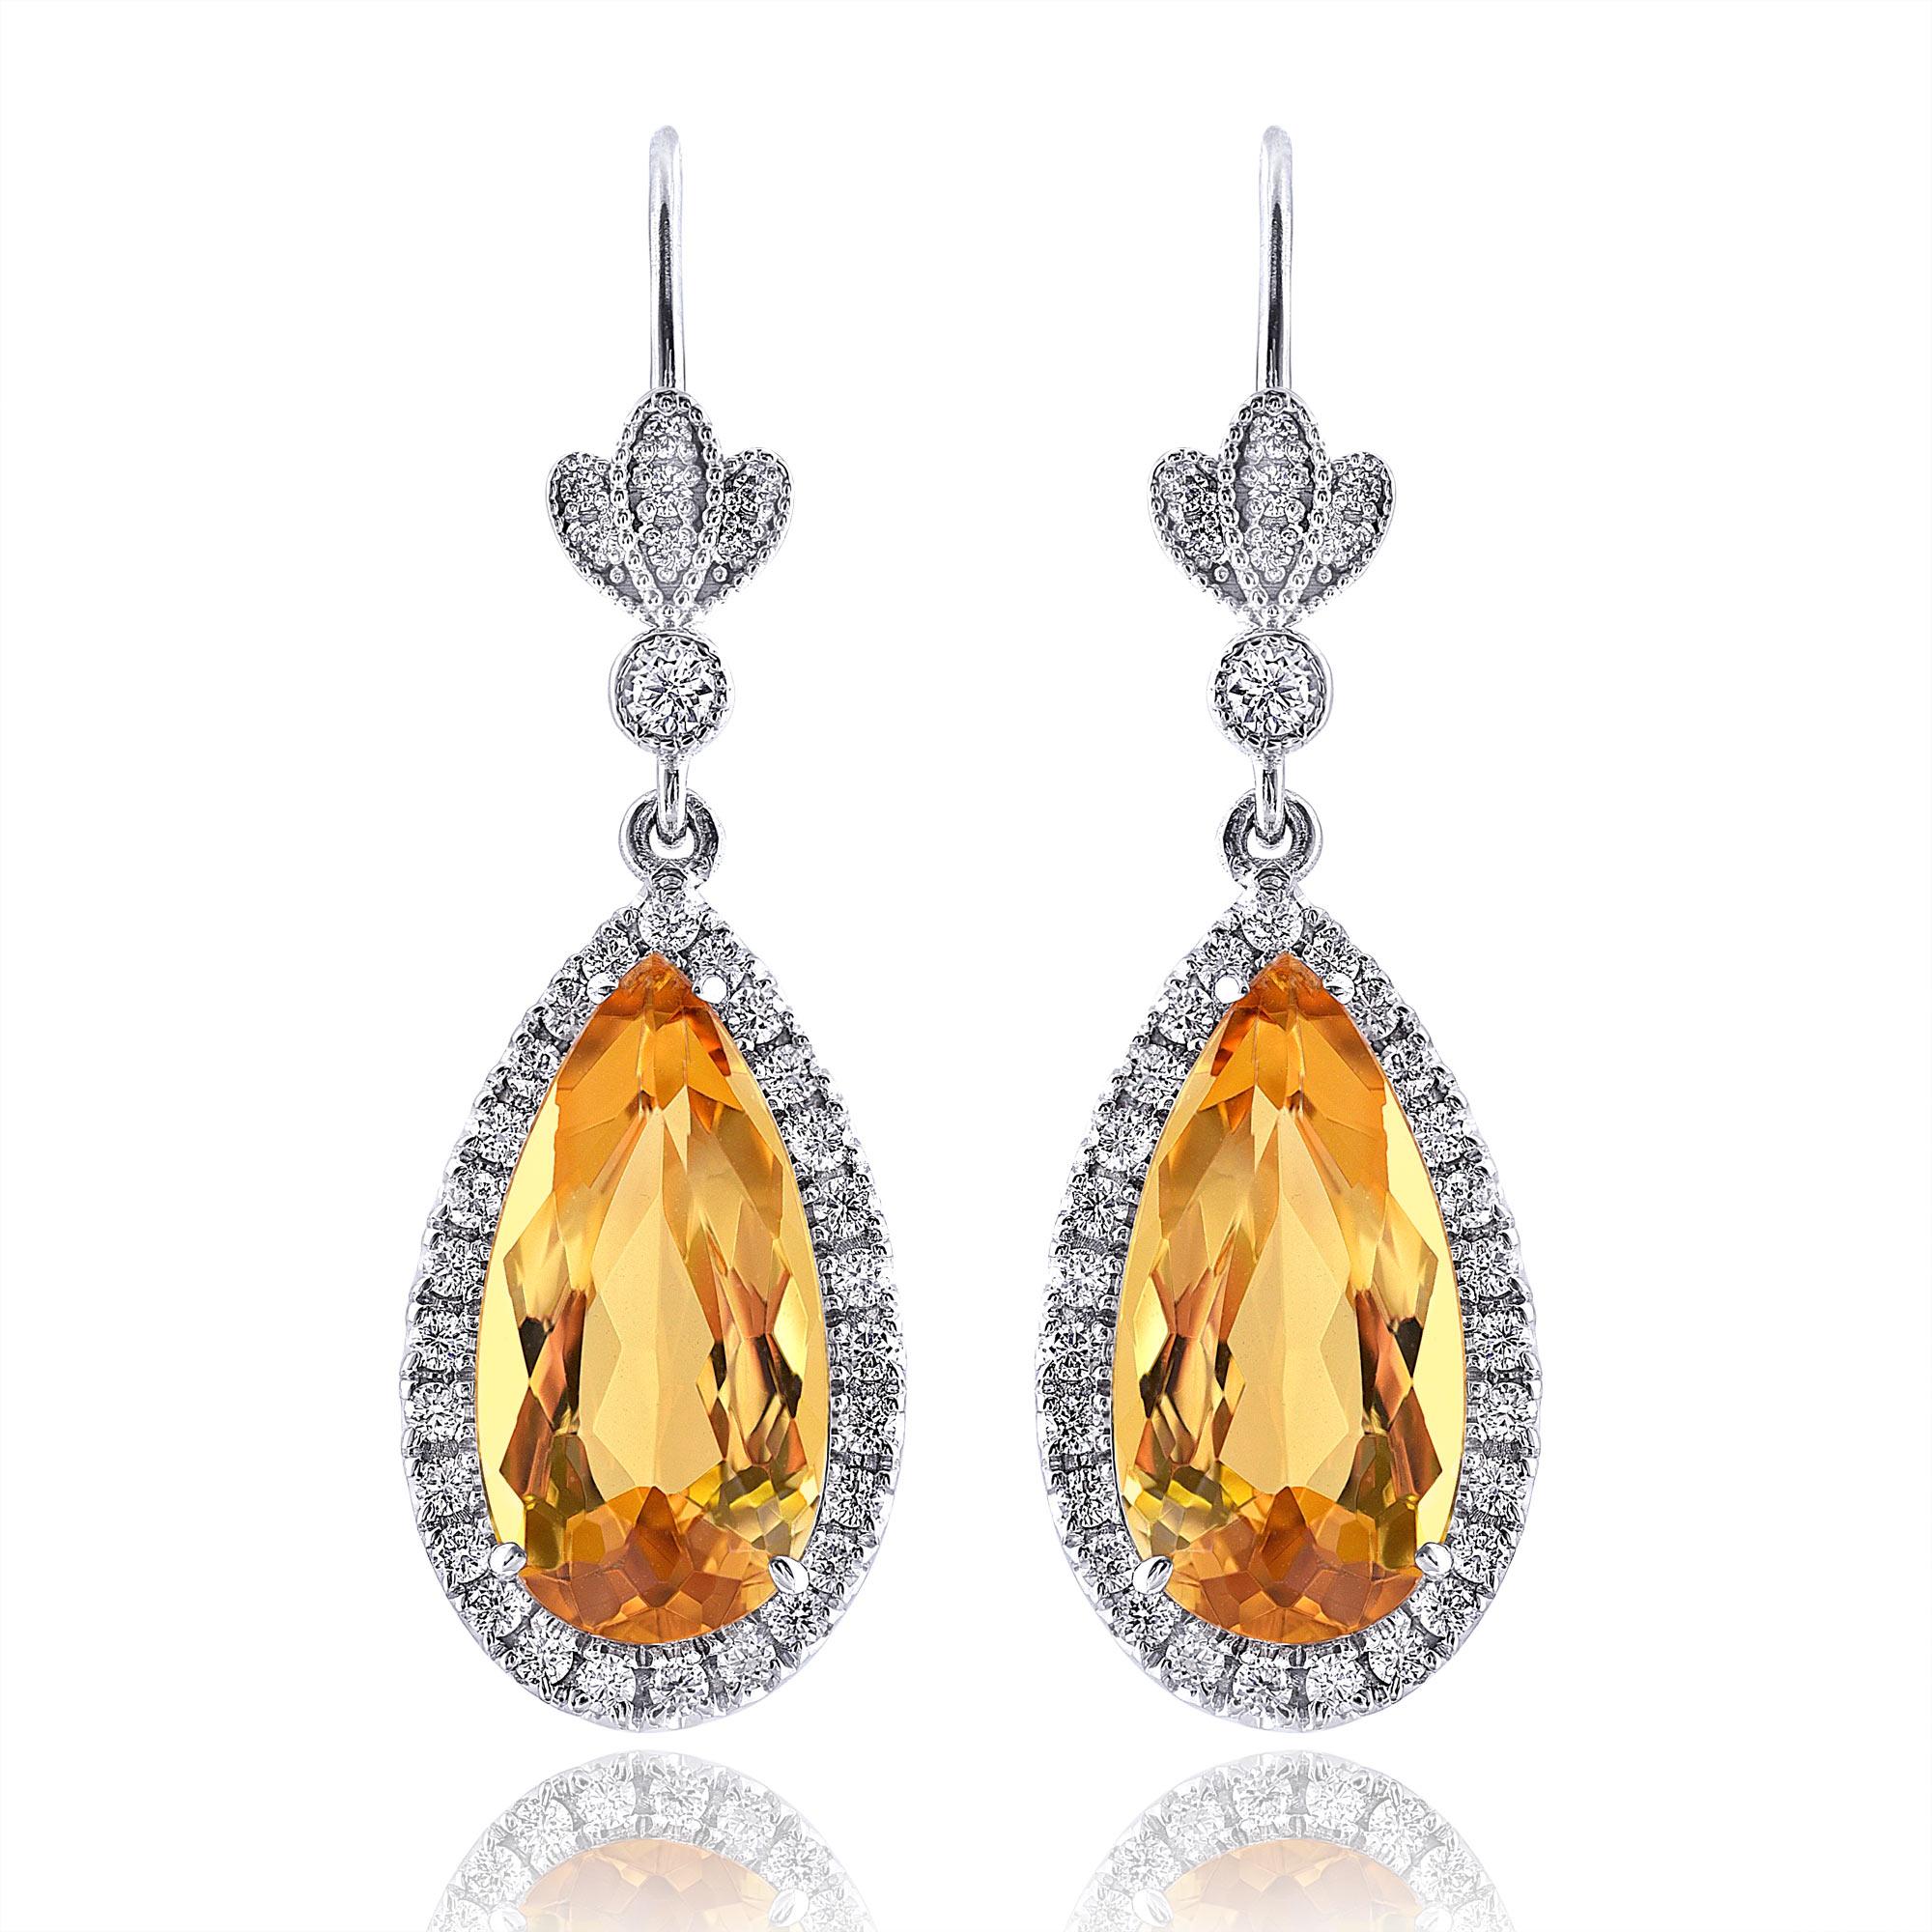 Brilliant Cut Natural Yellow Topaz 10.26 carats  set in 14K White Gold Earrings with Diamonds For Sale